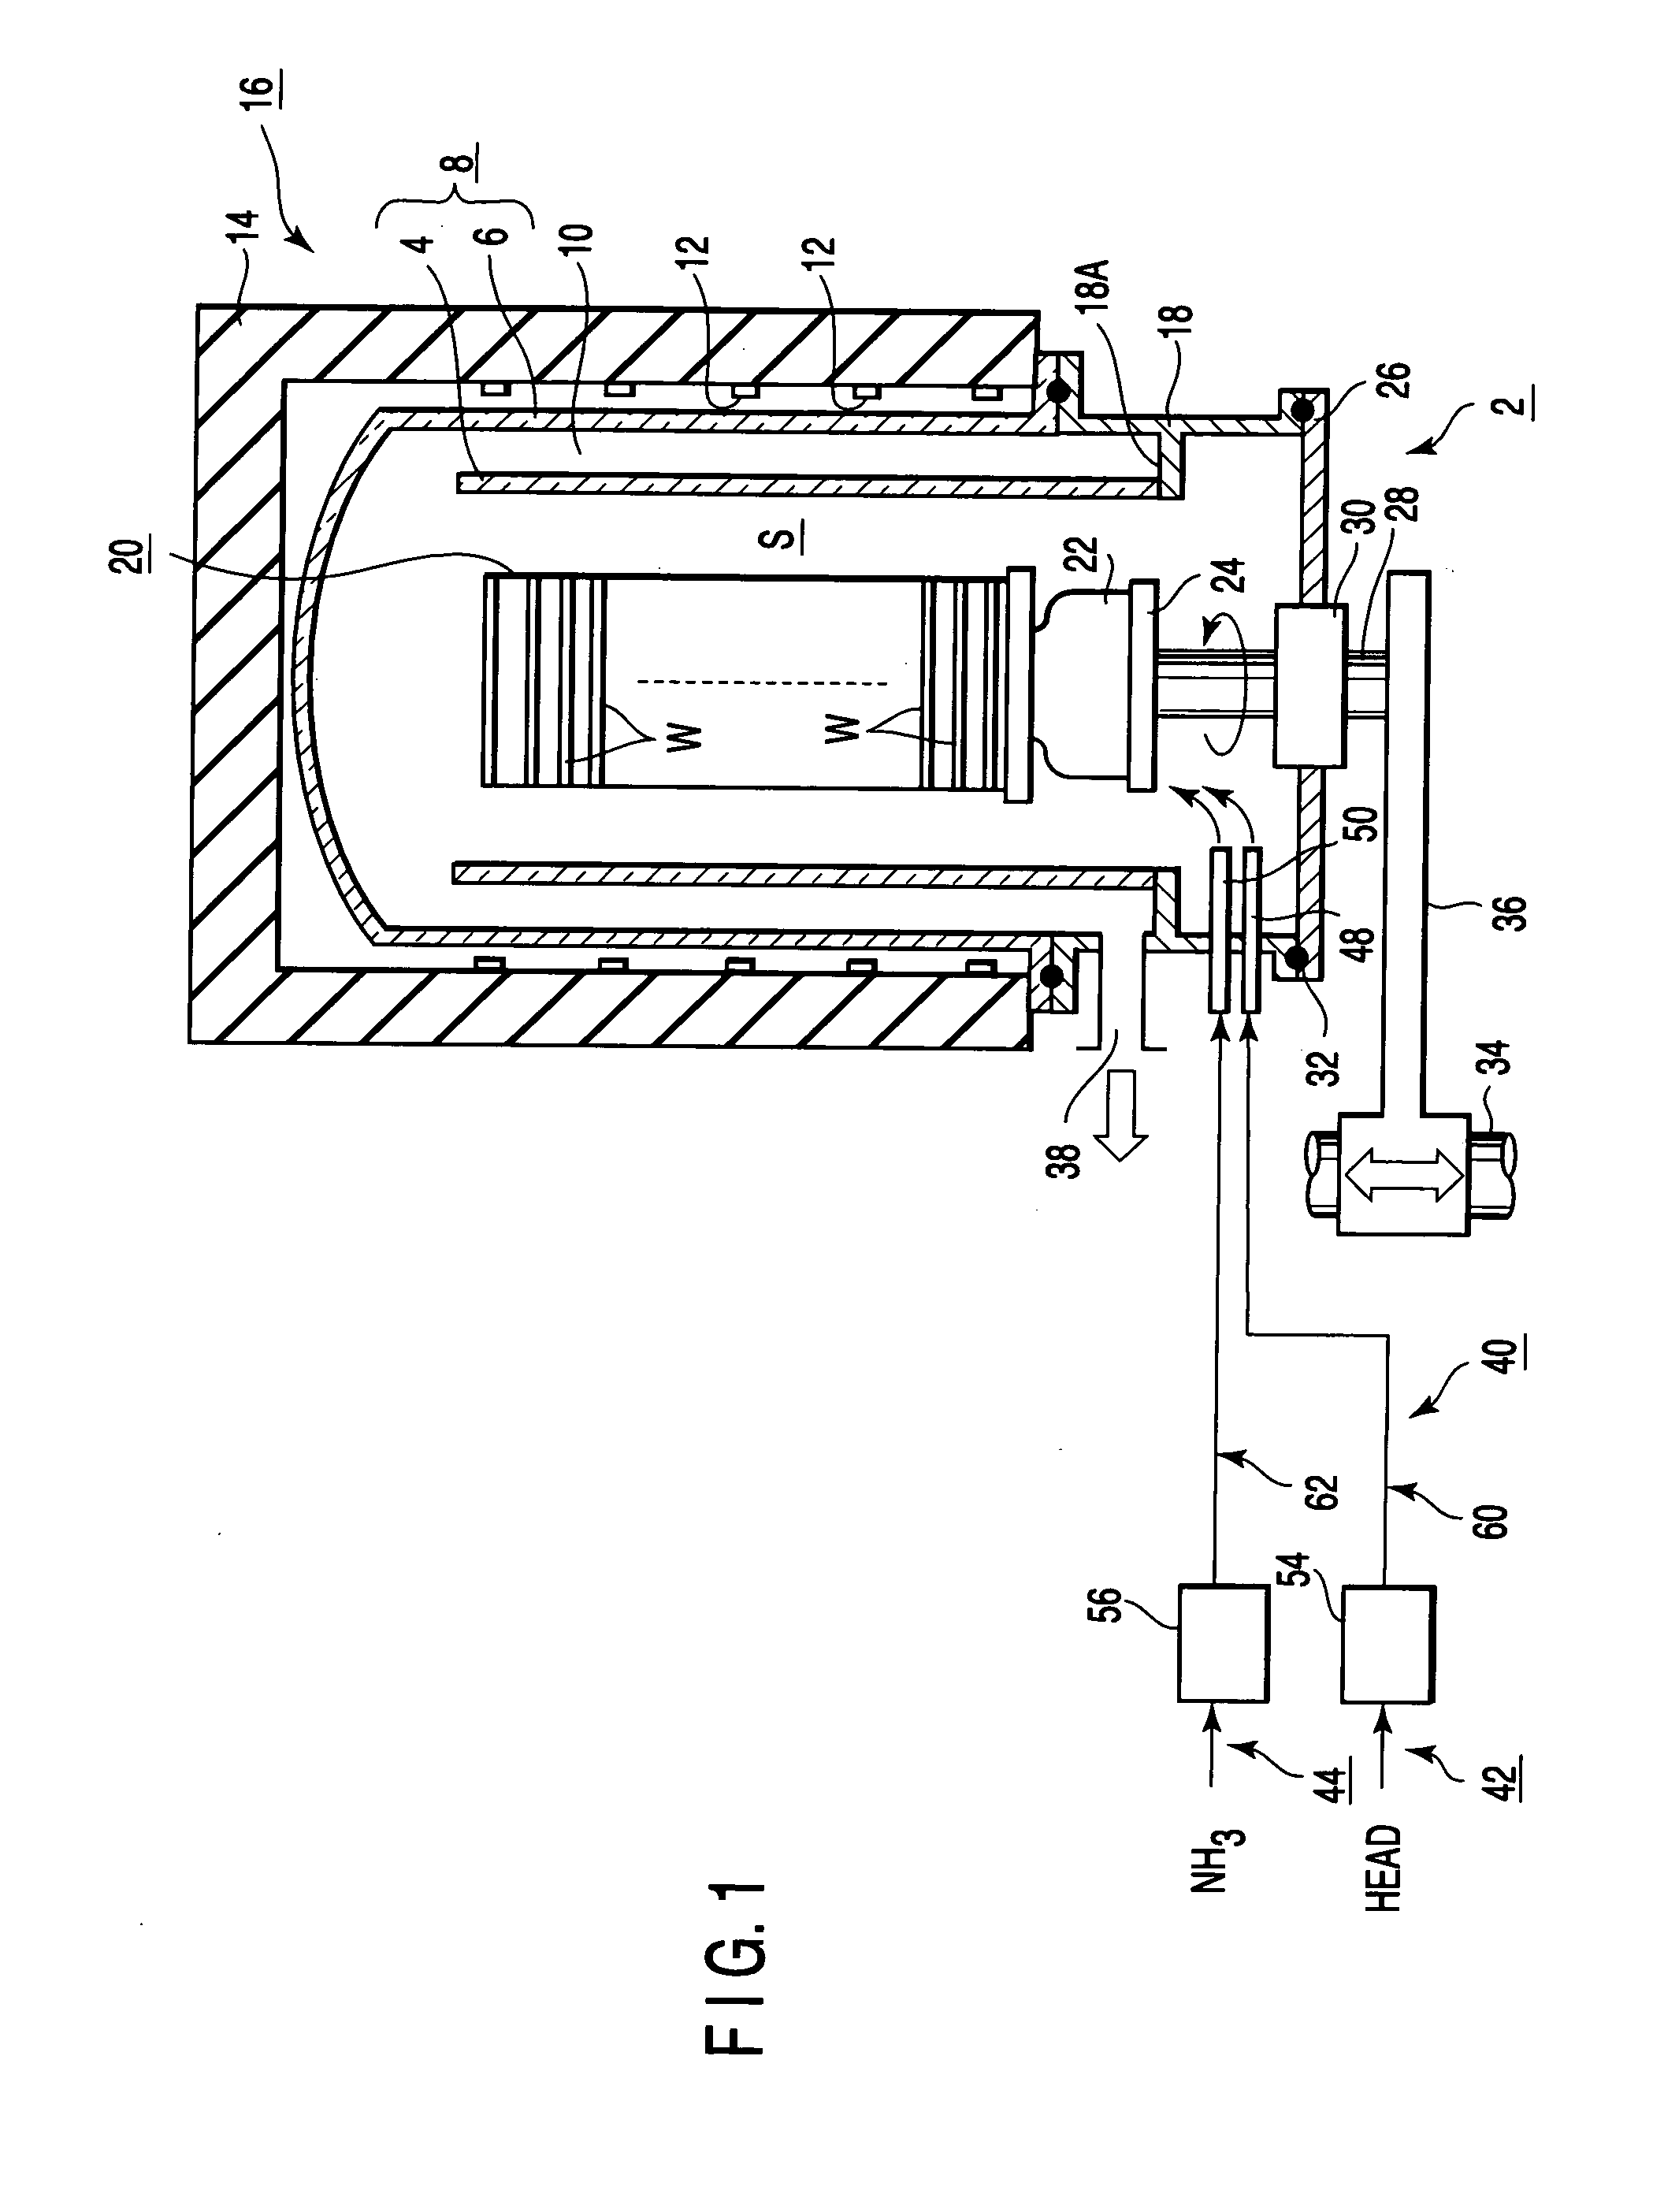 Method of cvd for forming silicon nitride film on substrate